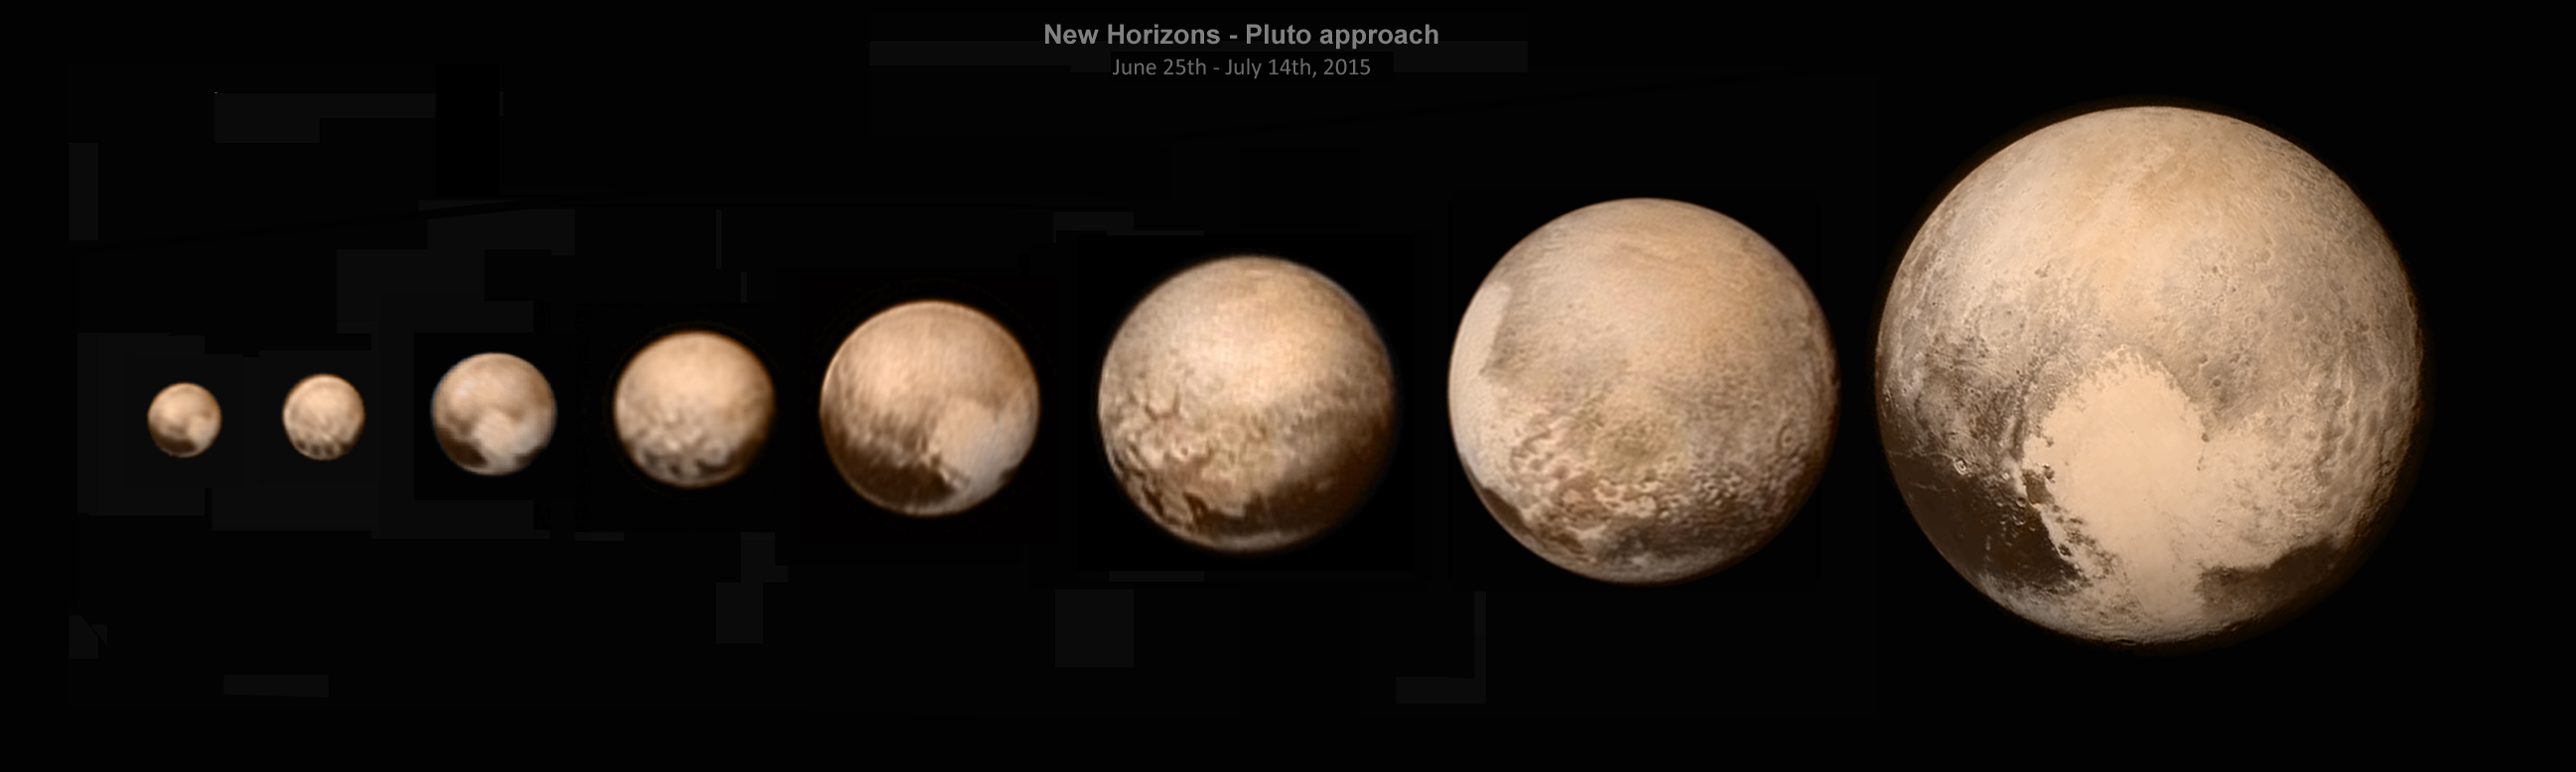 New Photos of Pluto Moons Nix and Hydra Show Best Views Yet